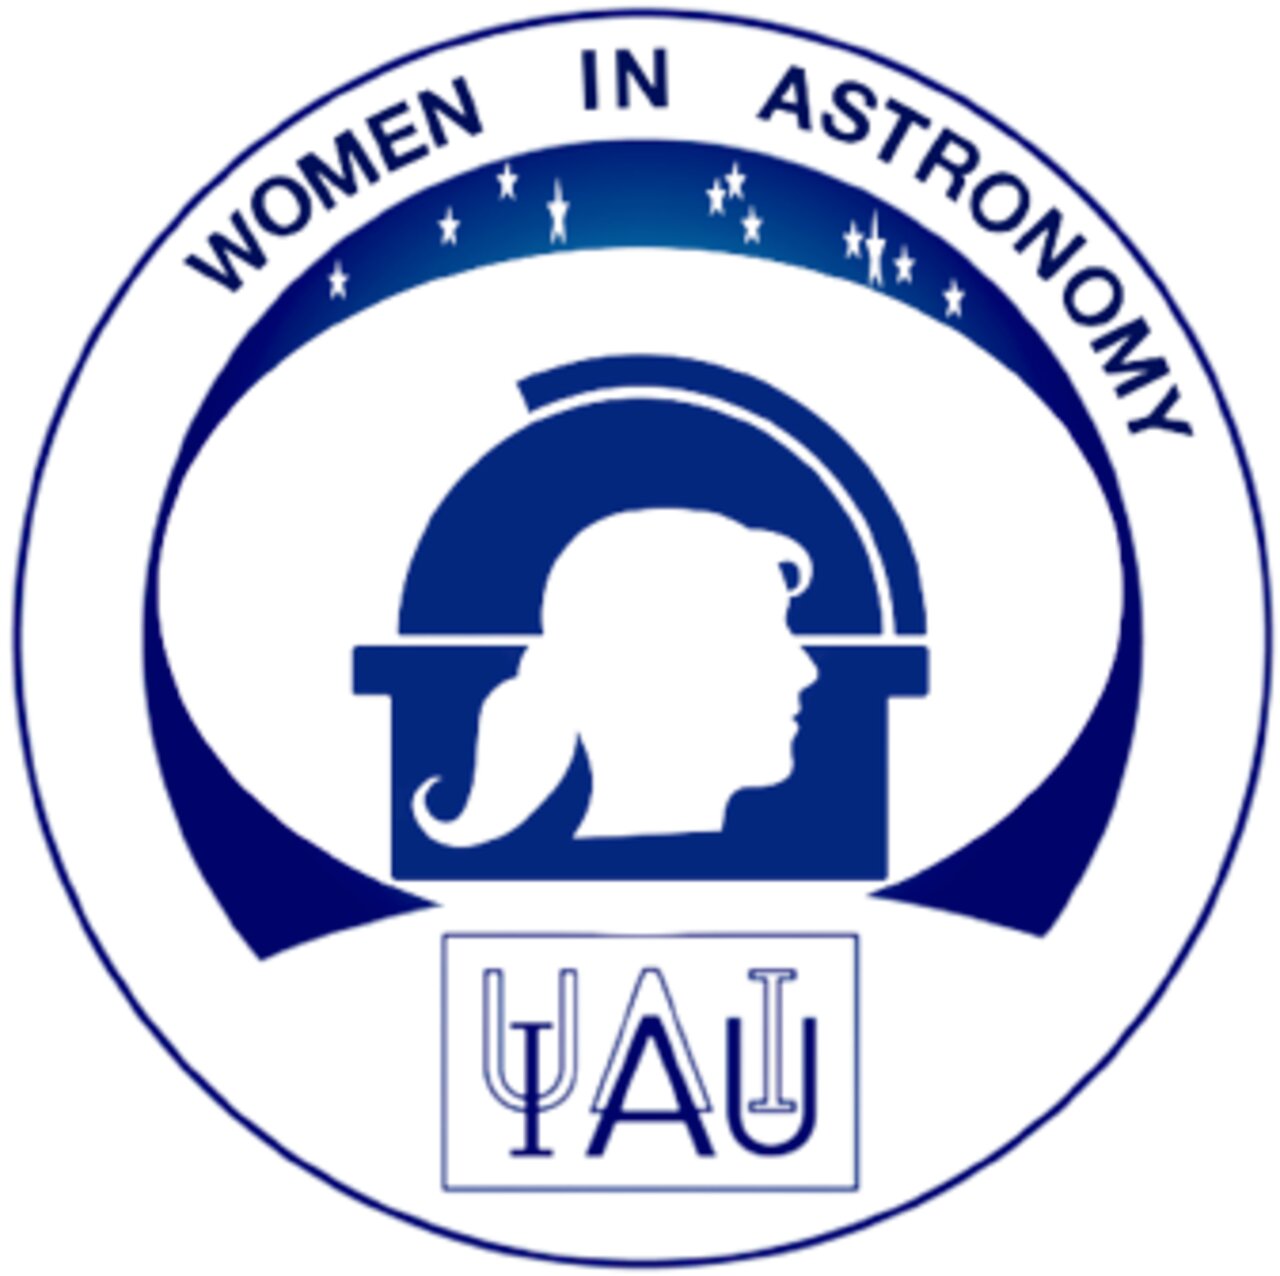 Women in Astronomy working group logo